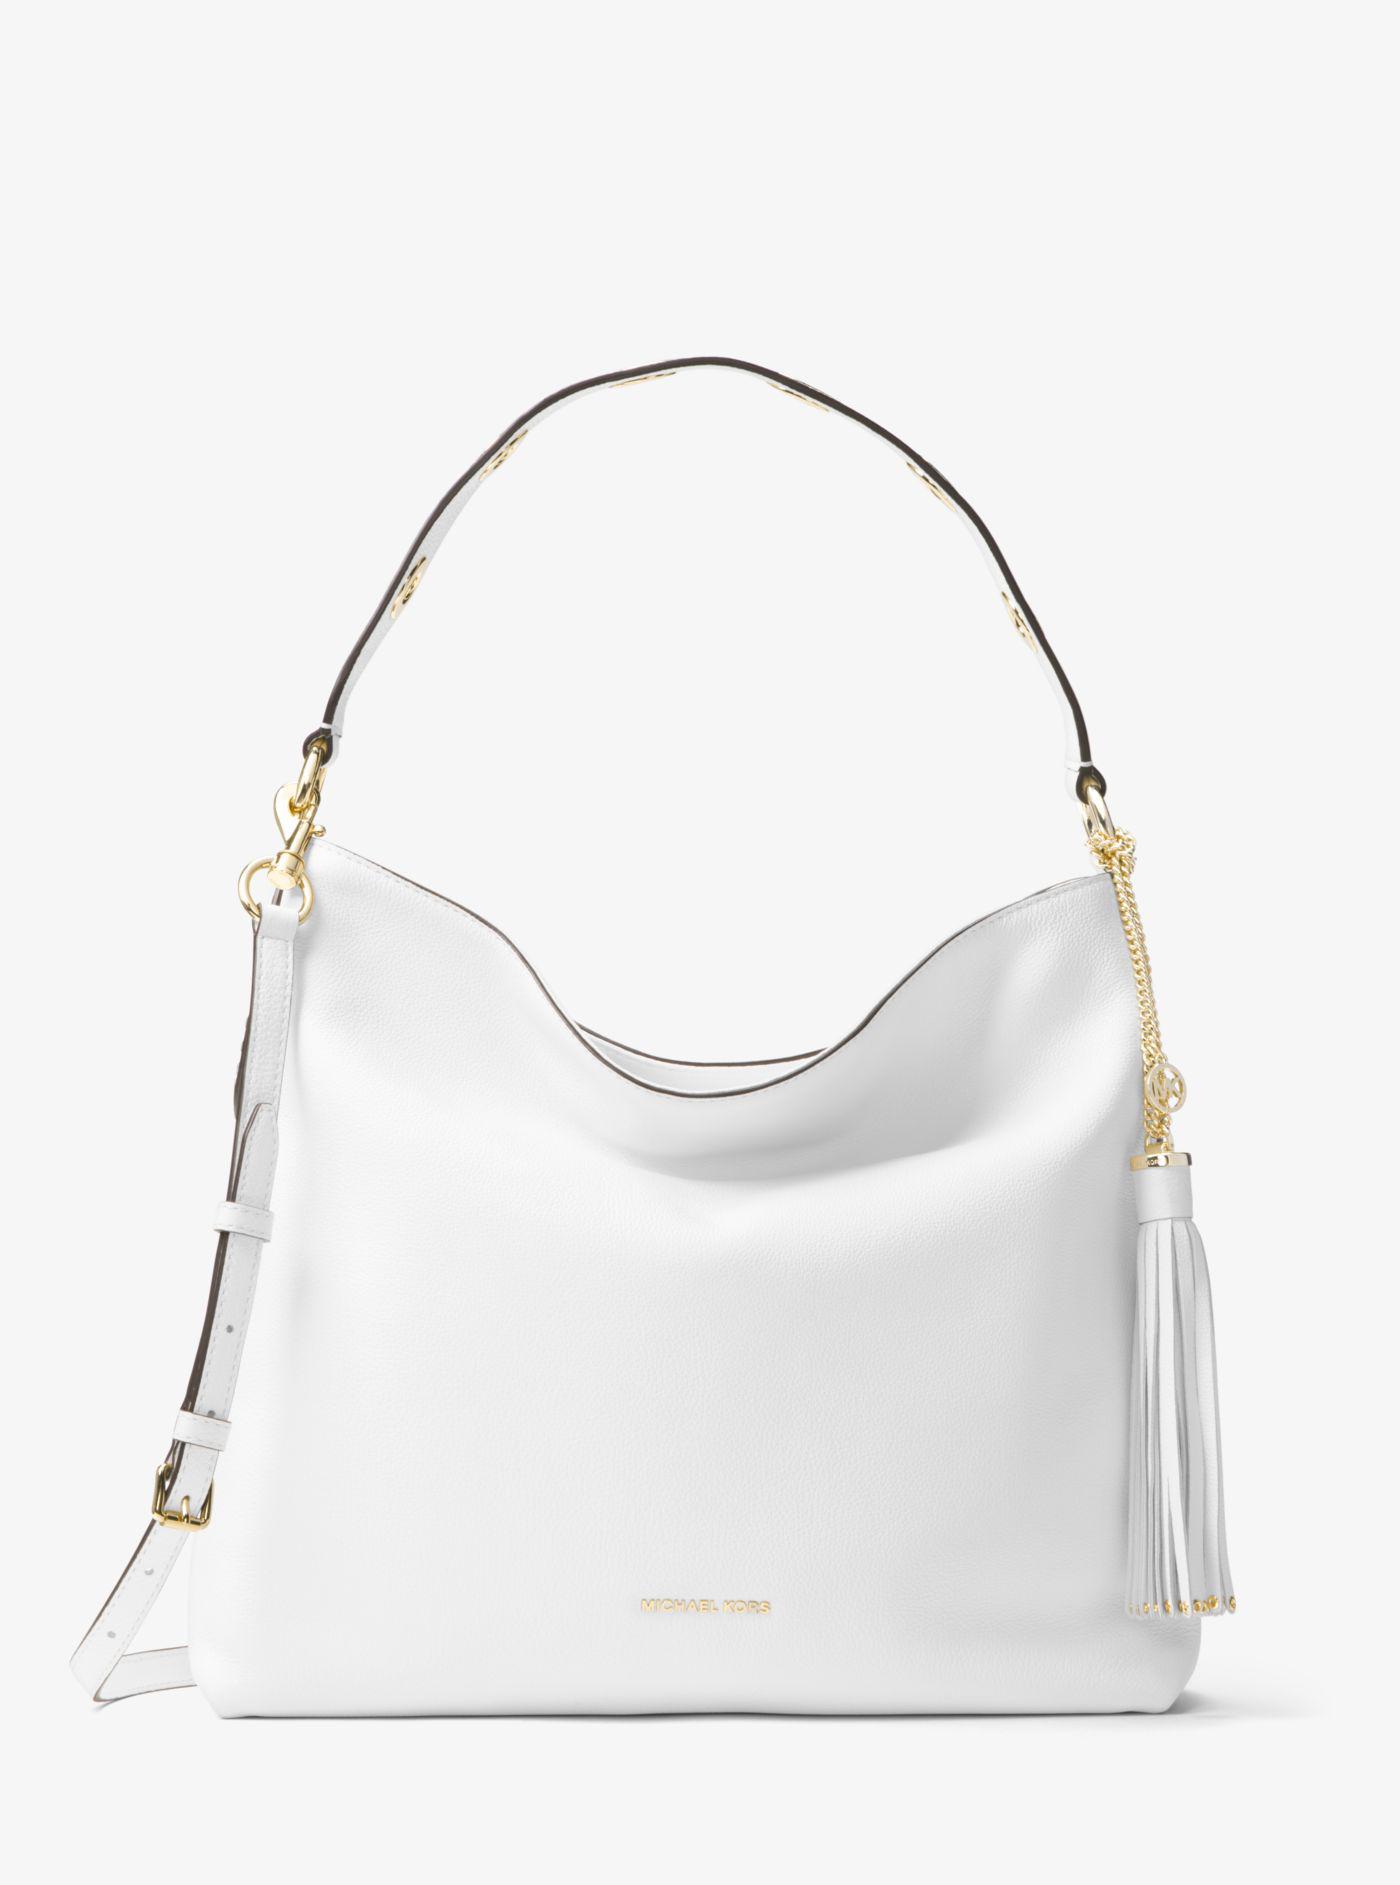 Michael Kors Brooklyn Large Leather Shoulder Bag in White - Lyst